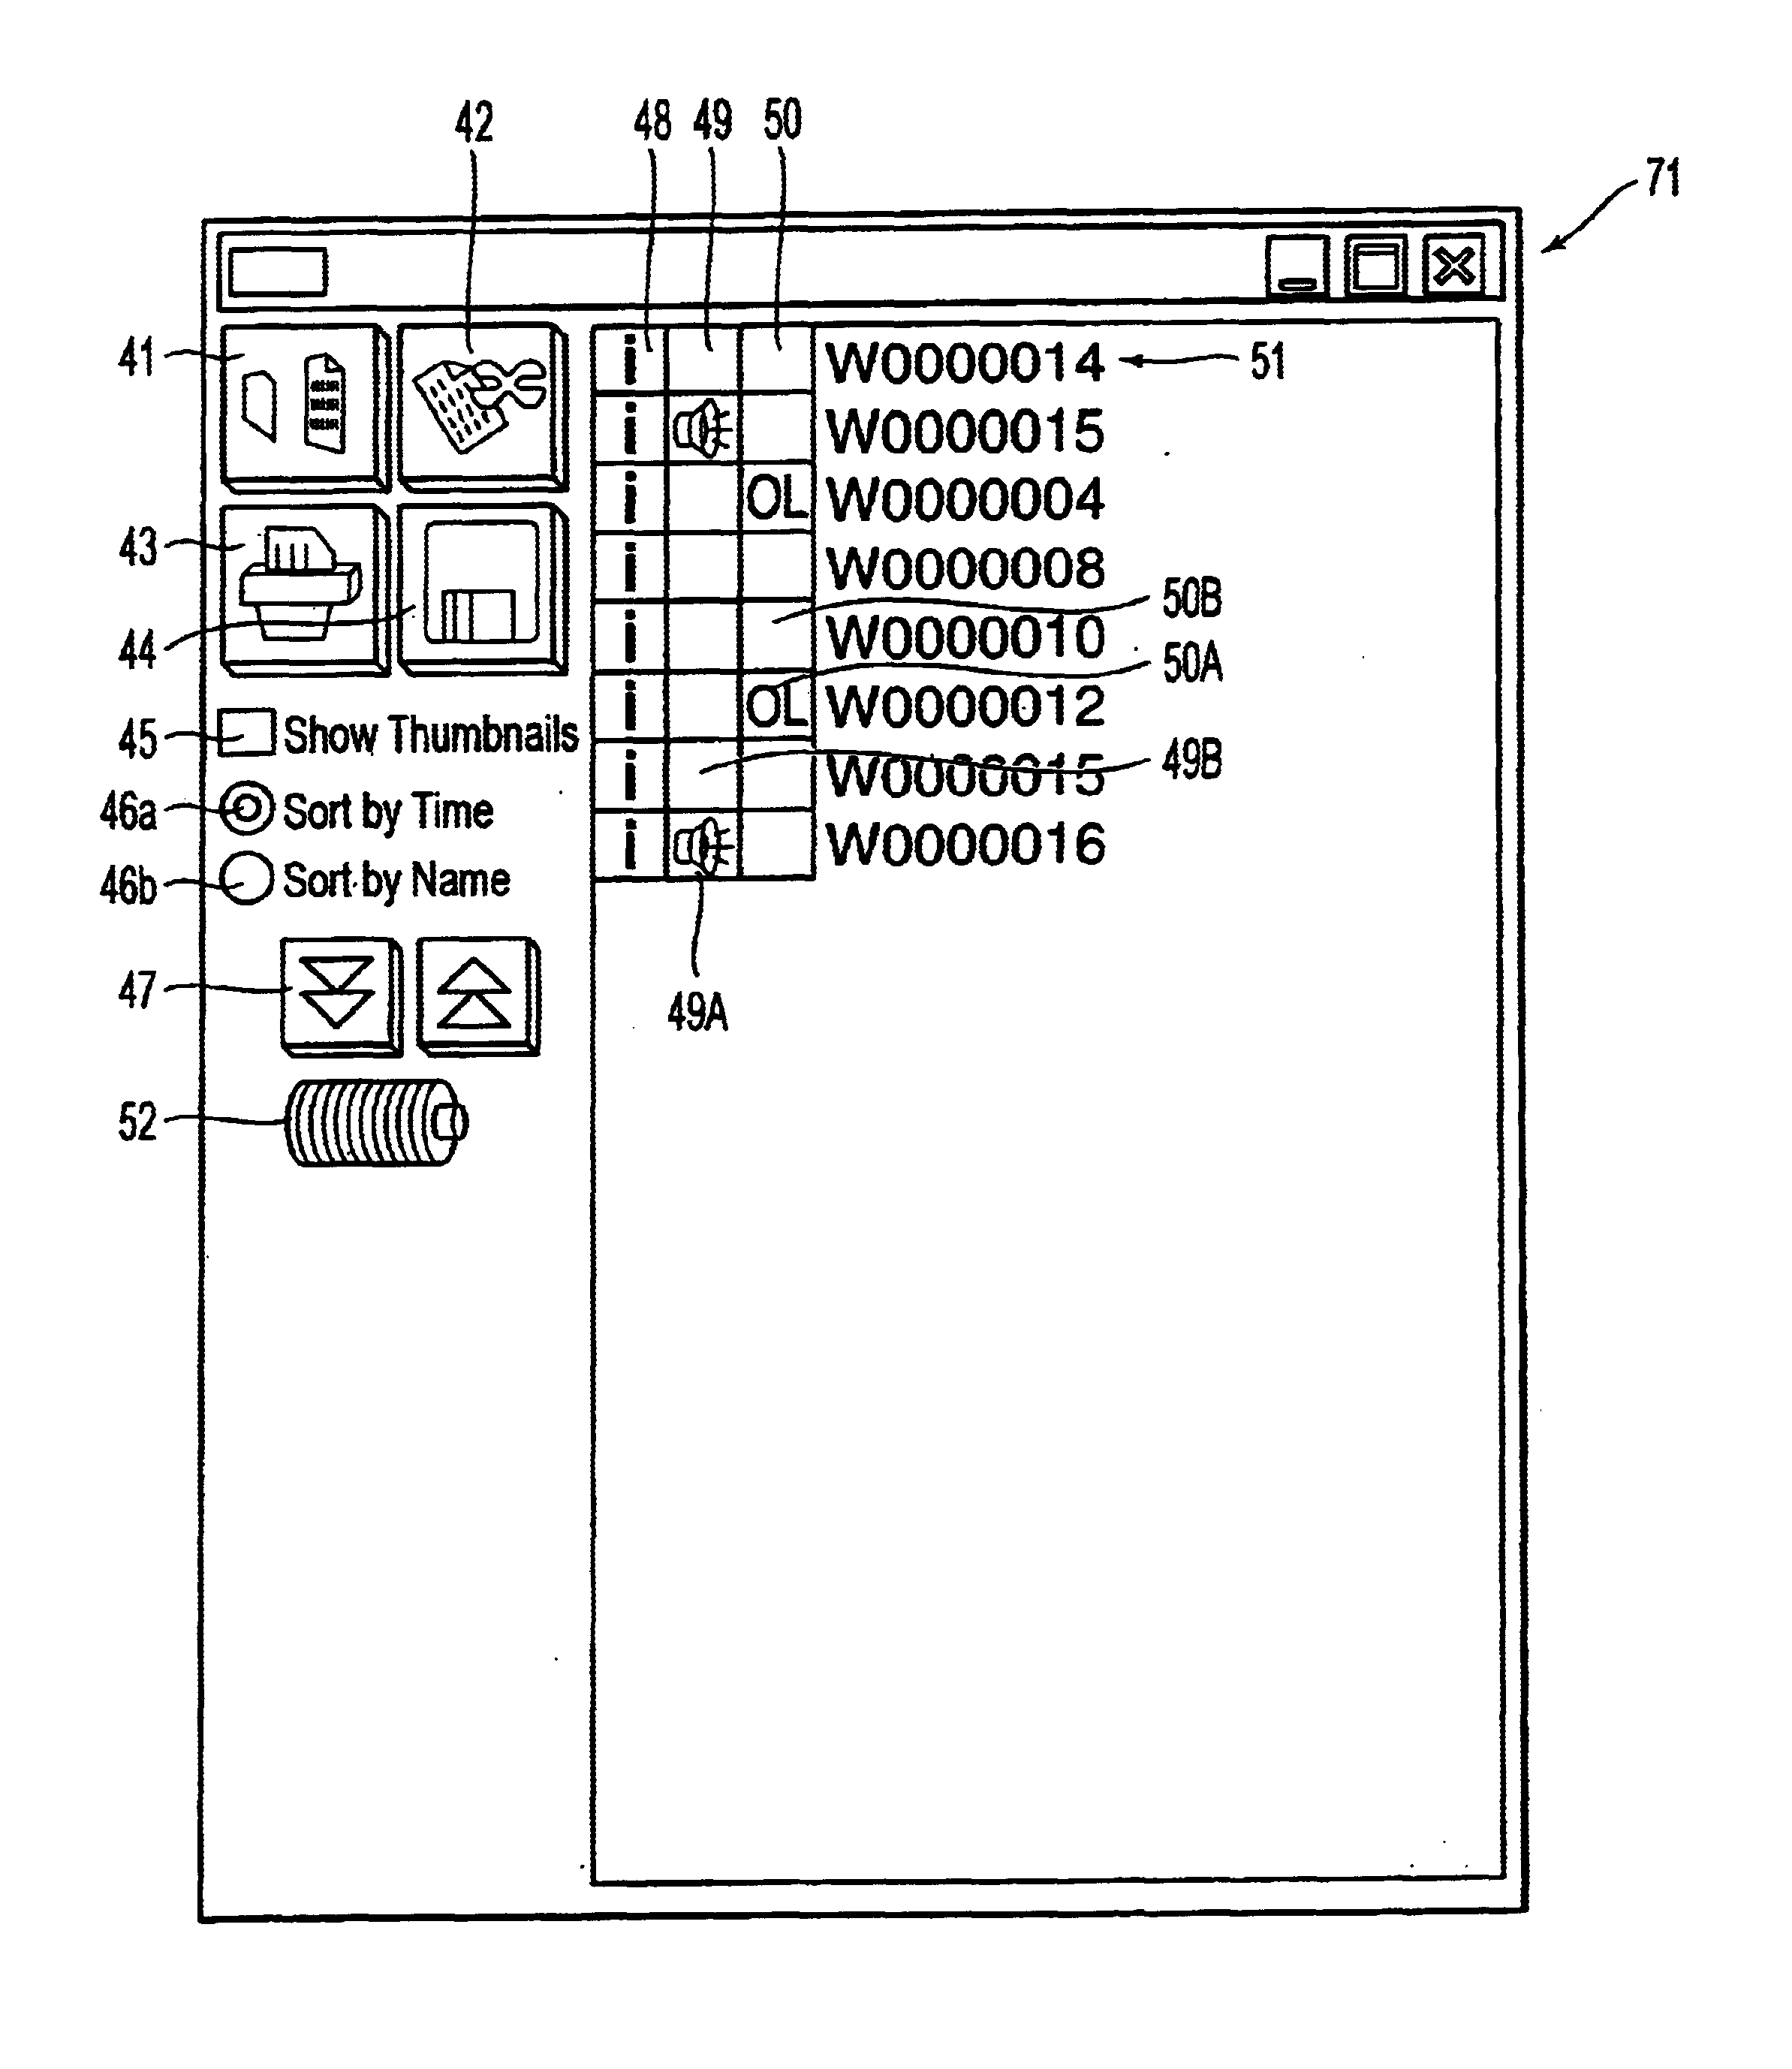 Display apparatus and methods, and recording medium for controlling same